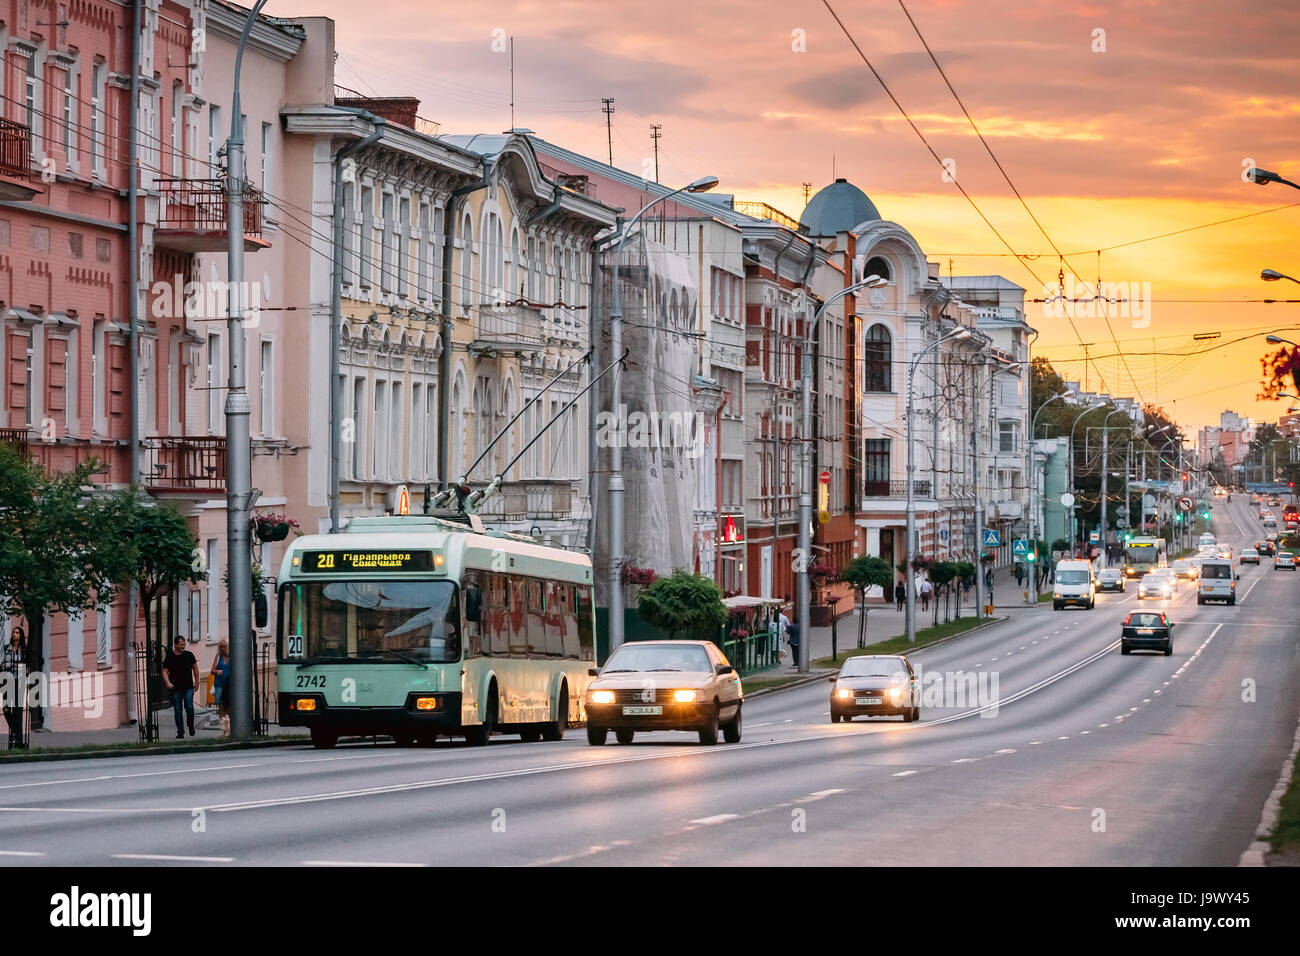 Gomel, Belarus - July 19, 2016: Evening Traffic And Public Trolleybus On Sovetskaya Street Dramatic Sky With Warm Colors At Sunset. Stock Photo